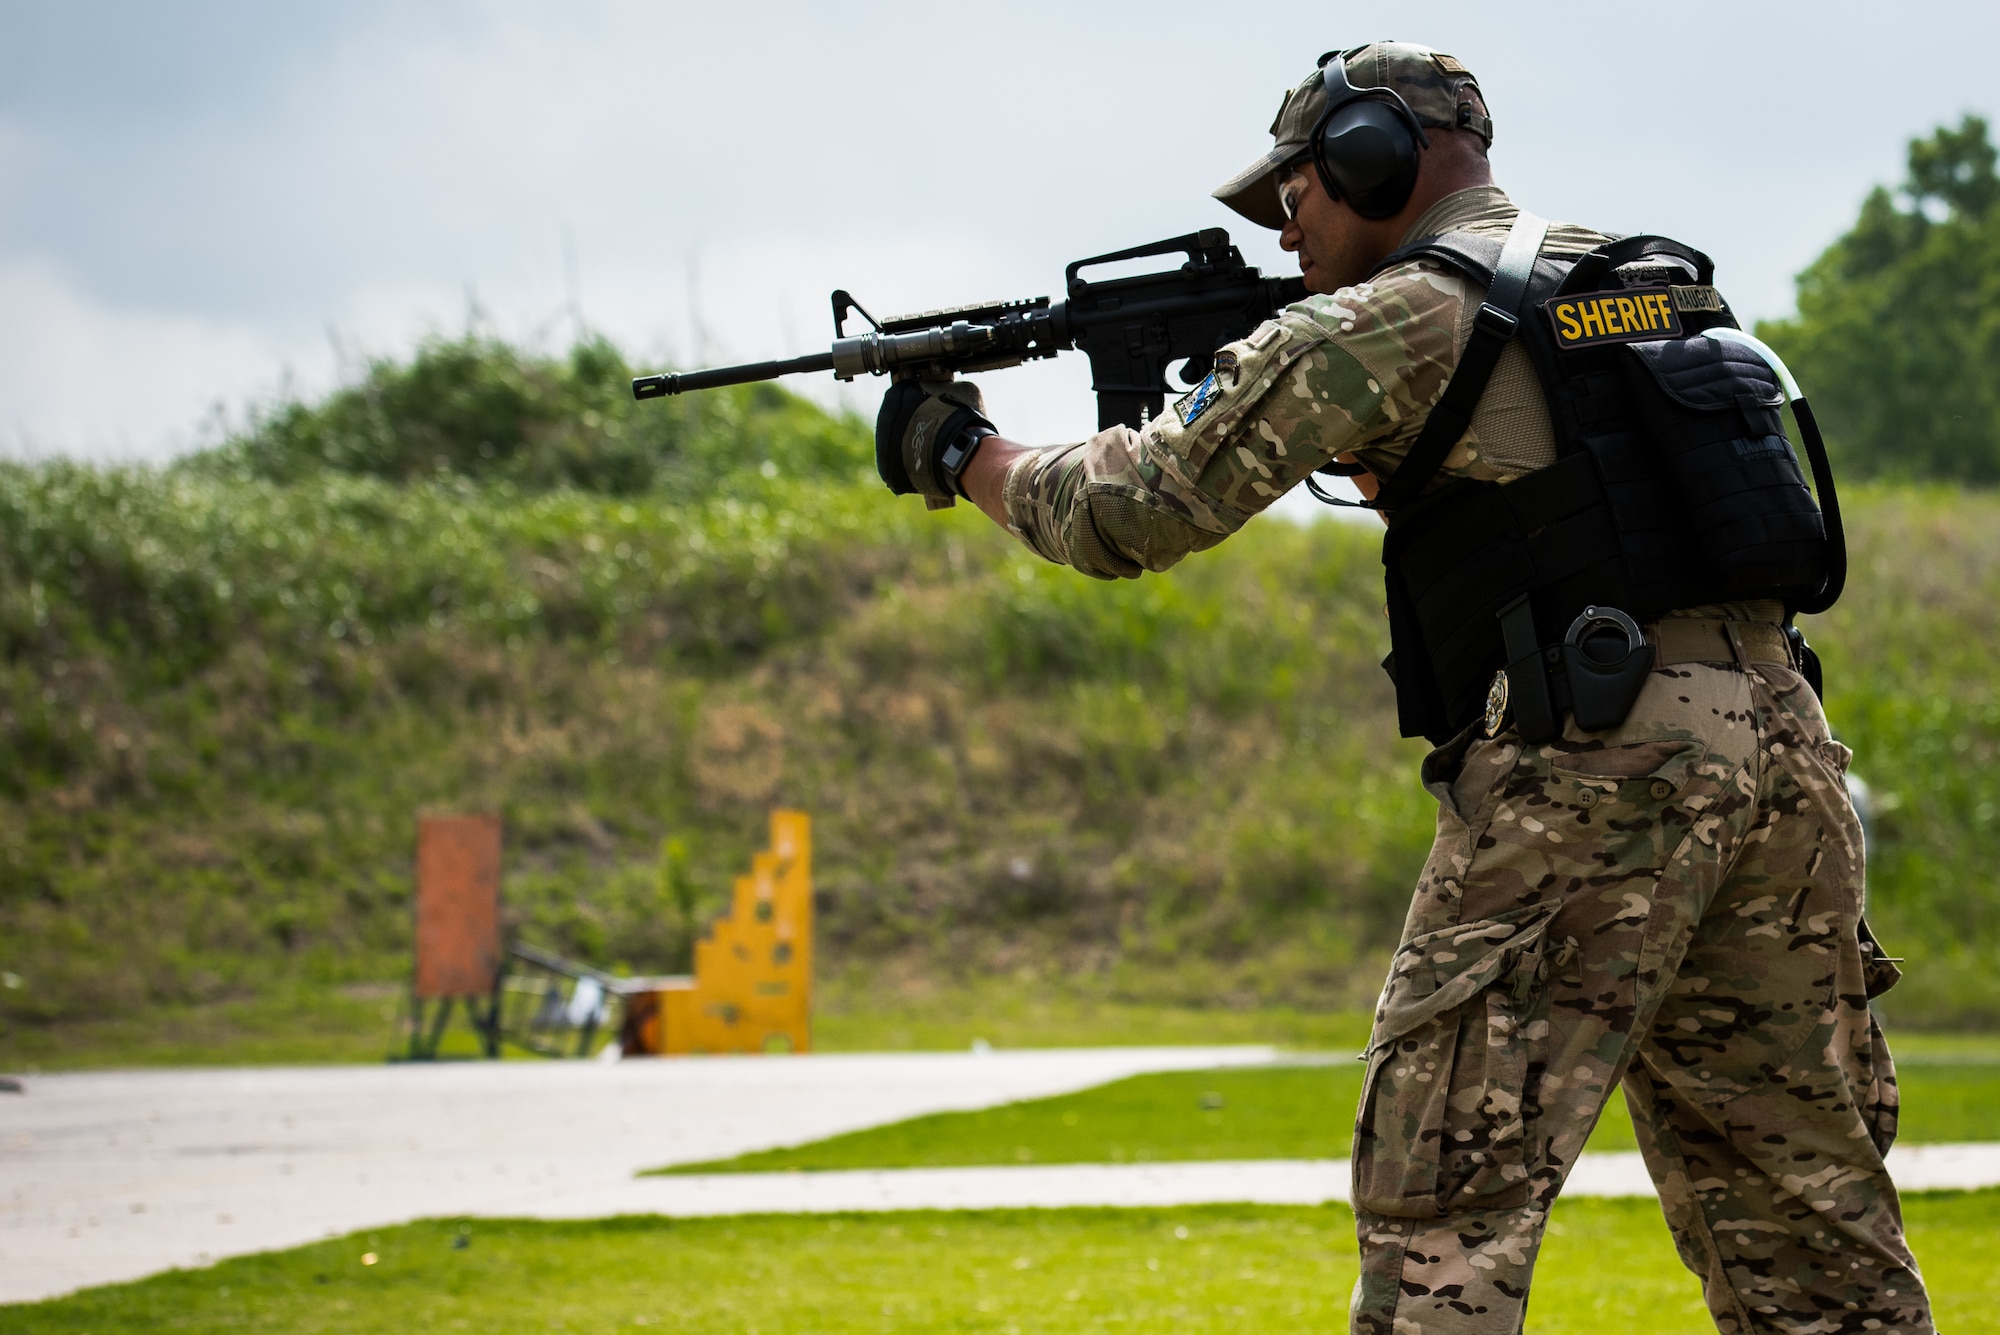 Oklahoma Army National Guard Chief Warrant Officer 2 Tyrie Haught, a Chinook pilot at the 2-149 General Support Aviation Battalion in Lexington, Okla., and also a deputy sheriff for Oklahoma County, fires a weapon during a transition exercise at the Oklahoma County Sheriff's Office Training Center in Oklahoma City, May 26, 2016. Four Will Rogers Air National Guard Base Airmen joined local policing agencies for weapons training, May 24-26. The Oklahoma Country Sheriff's Office led the training to enhance communication and compatibility between various Oklahoma law enforcement groups. (U.S. Air National Guard photo by Senior Airman Tyler Woodward)